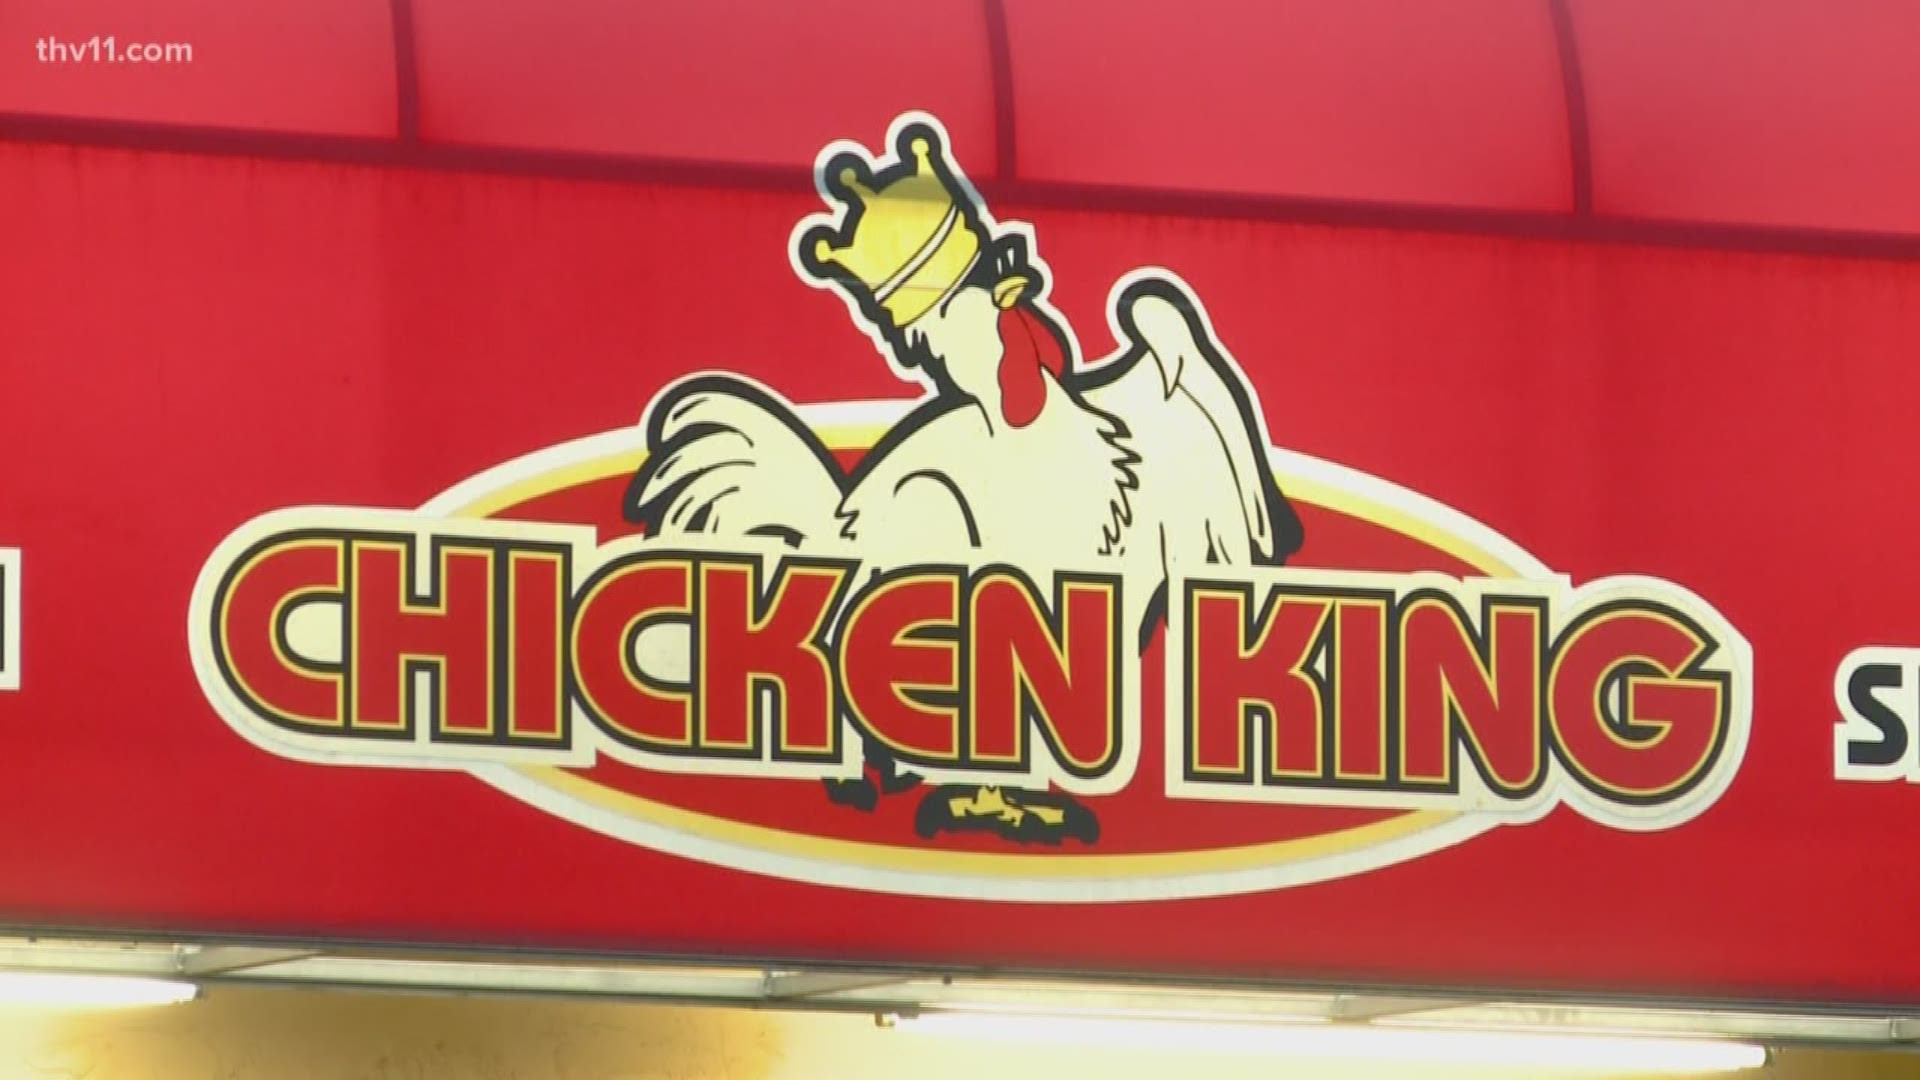 An employee of Chicken King in North Little Rock is dead after being injured in a fight yesterday.